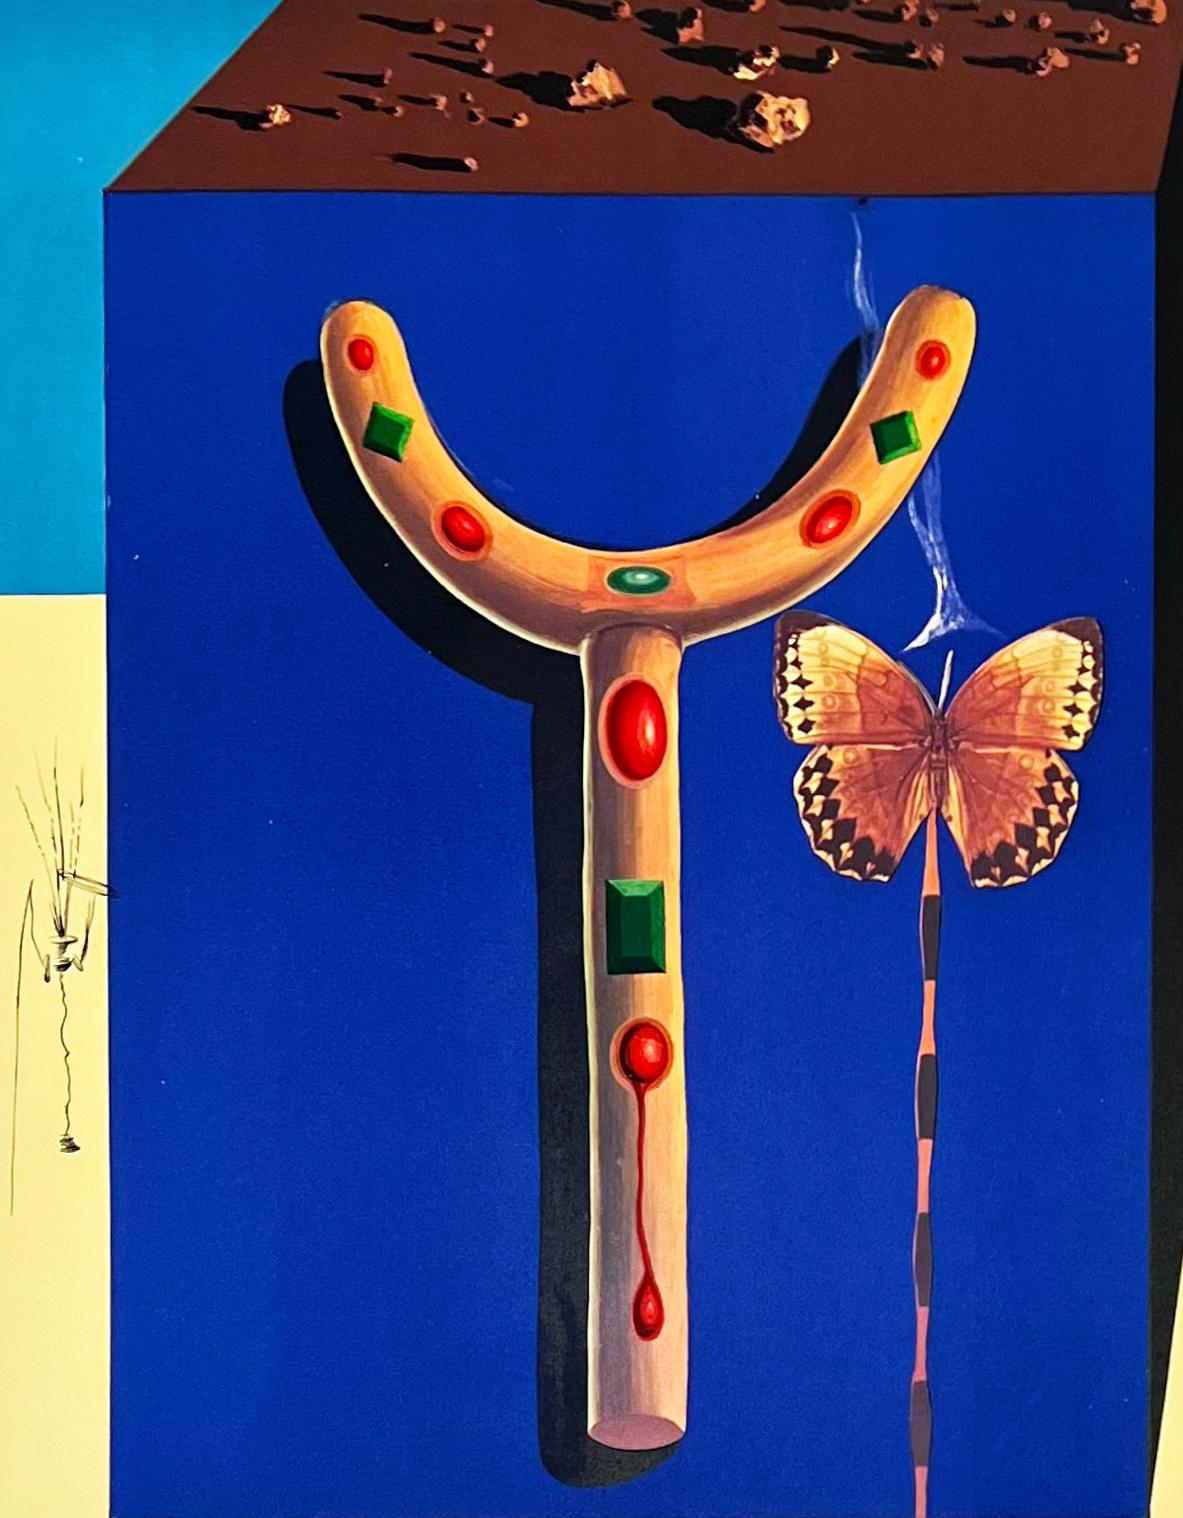 Salvador Dalí Abstract Print - Surrealist Crutches, from 1971 Memories of Surrealism